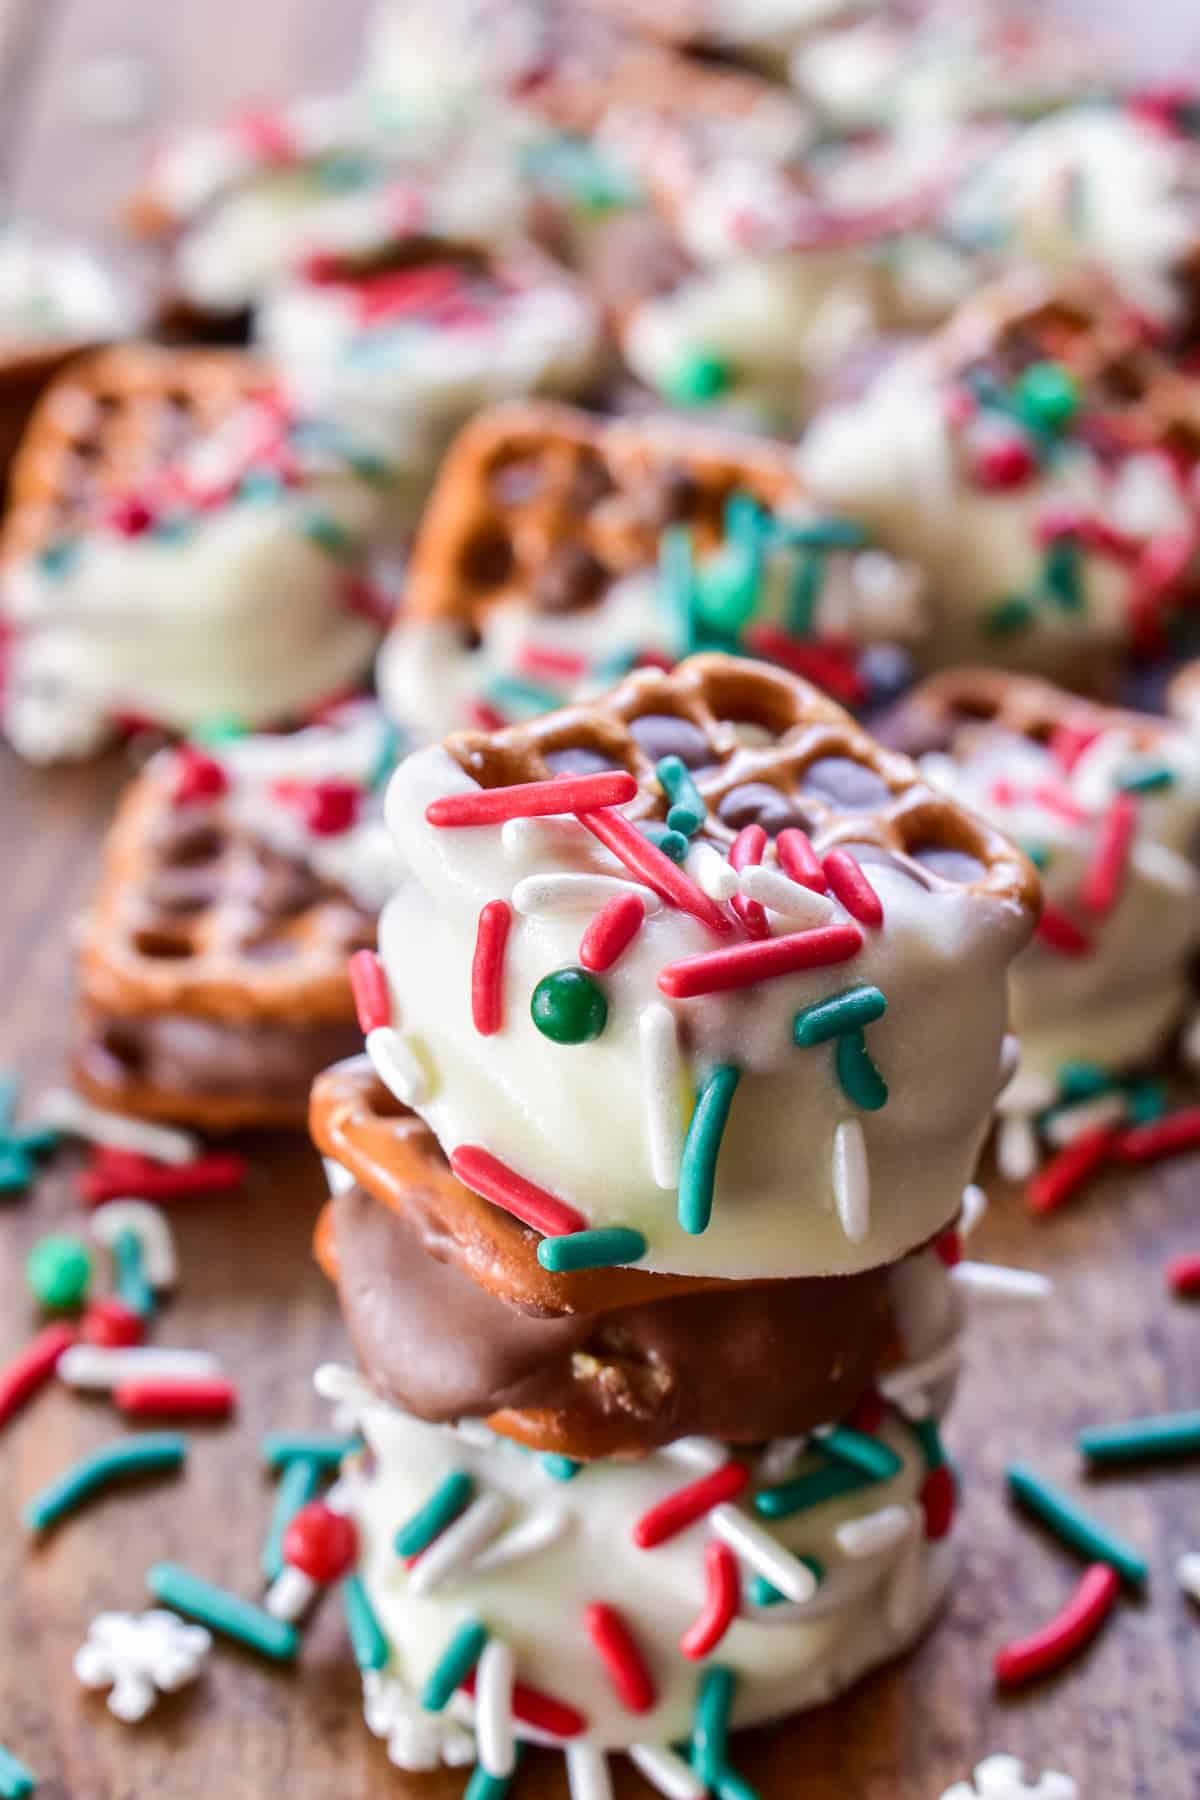 White chocolate dipped pretzel squares stuffed with peanut butter cups and decorated with red and green sprinkles